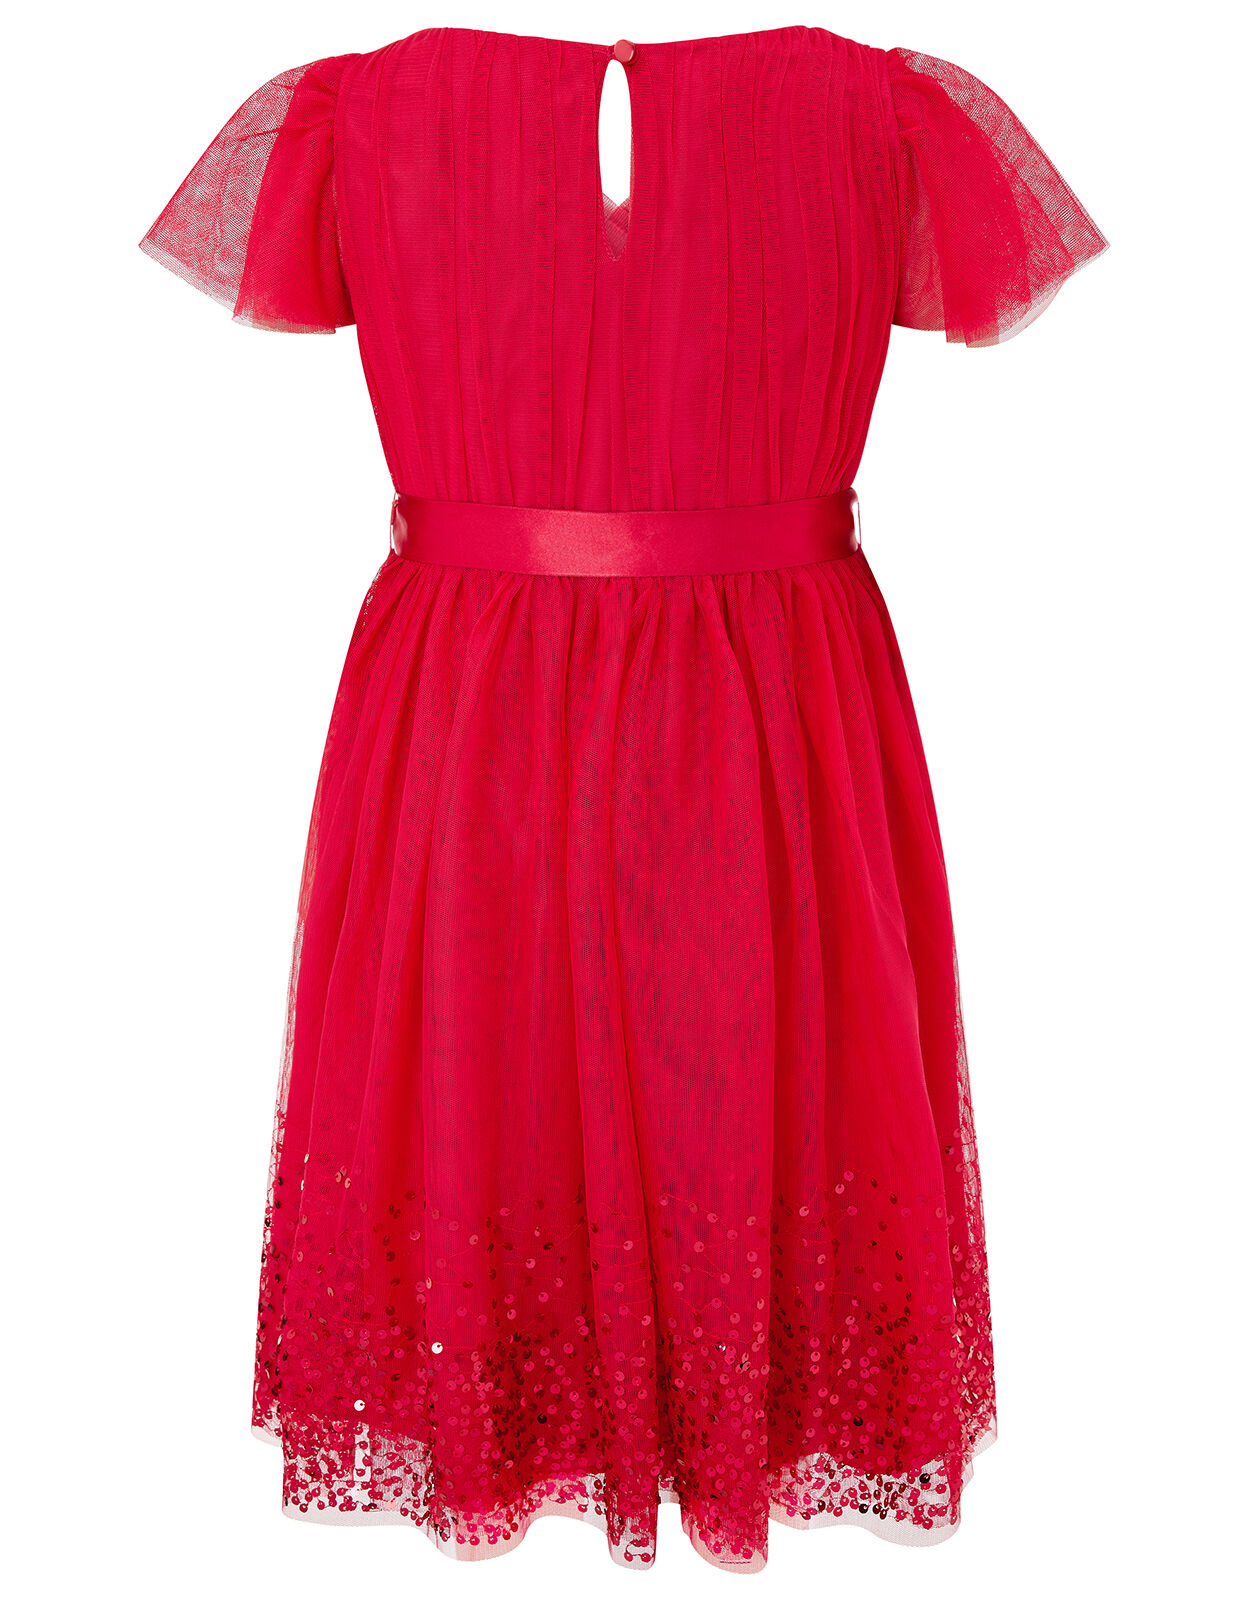 Sequin Tulle Wrap Dress Red | Girls ...